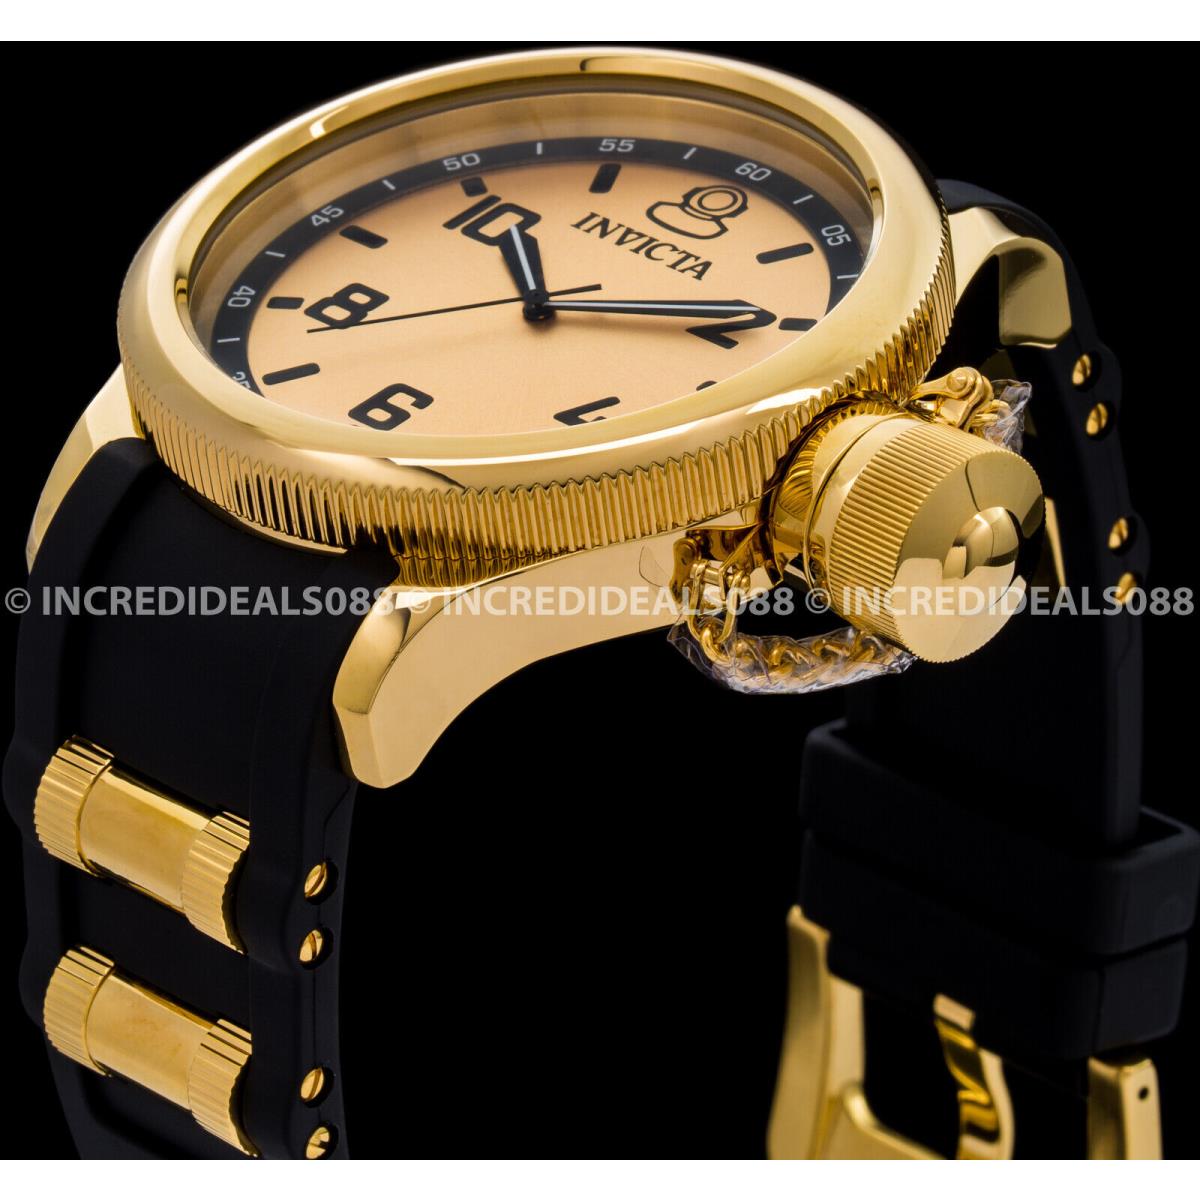 Invicta watch Russian Diver - Gold Dial, Black Band, Gold Bezel